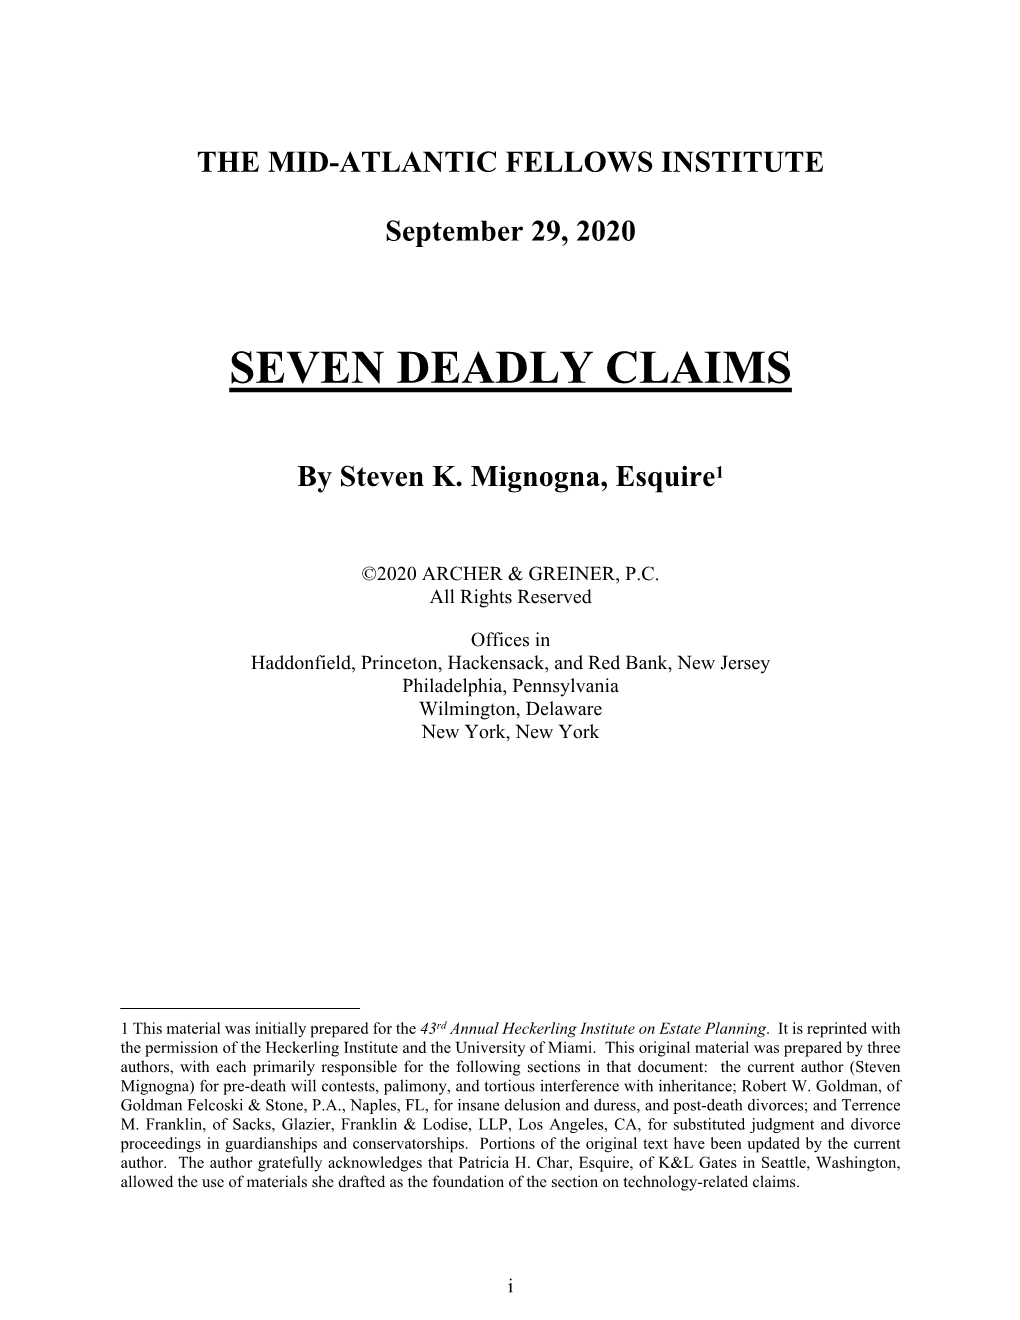 Seven Deadly Claims